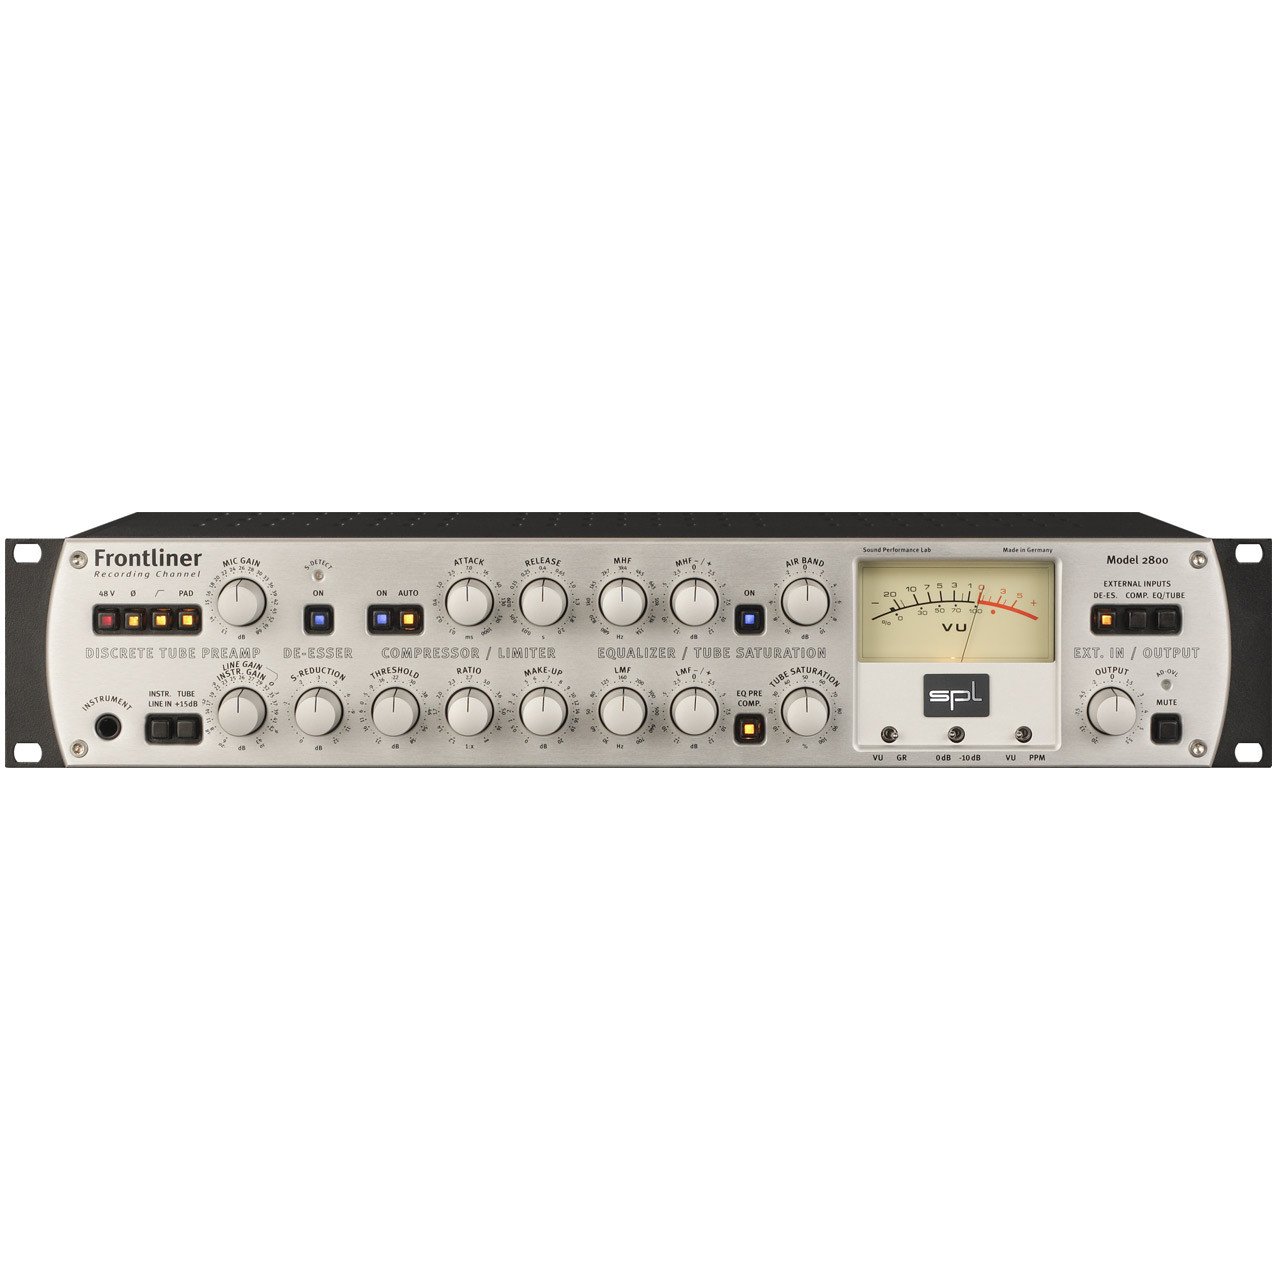 Preamps/Channel Strips - SPL Frontliner Recording Channel